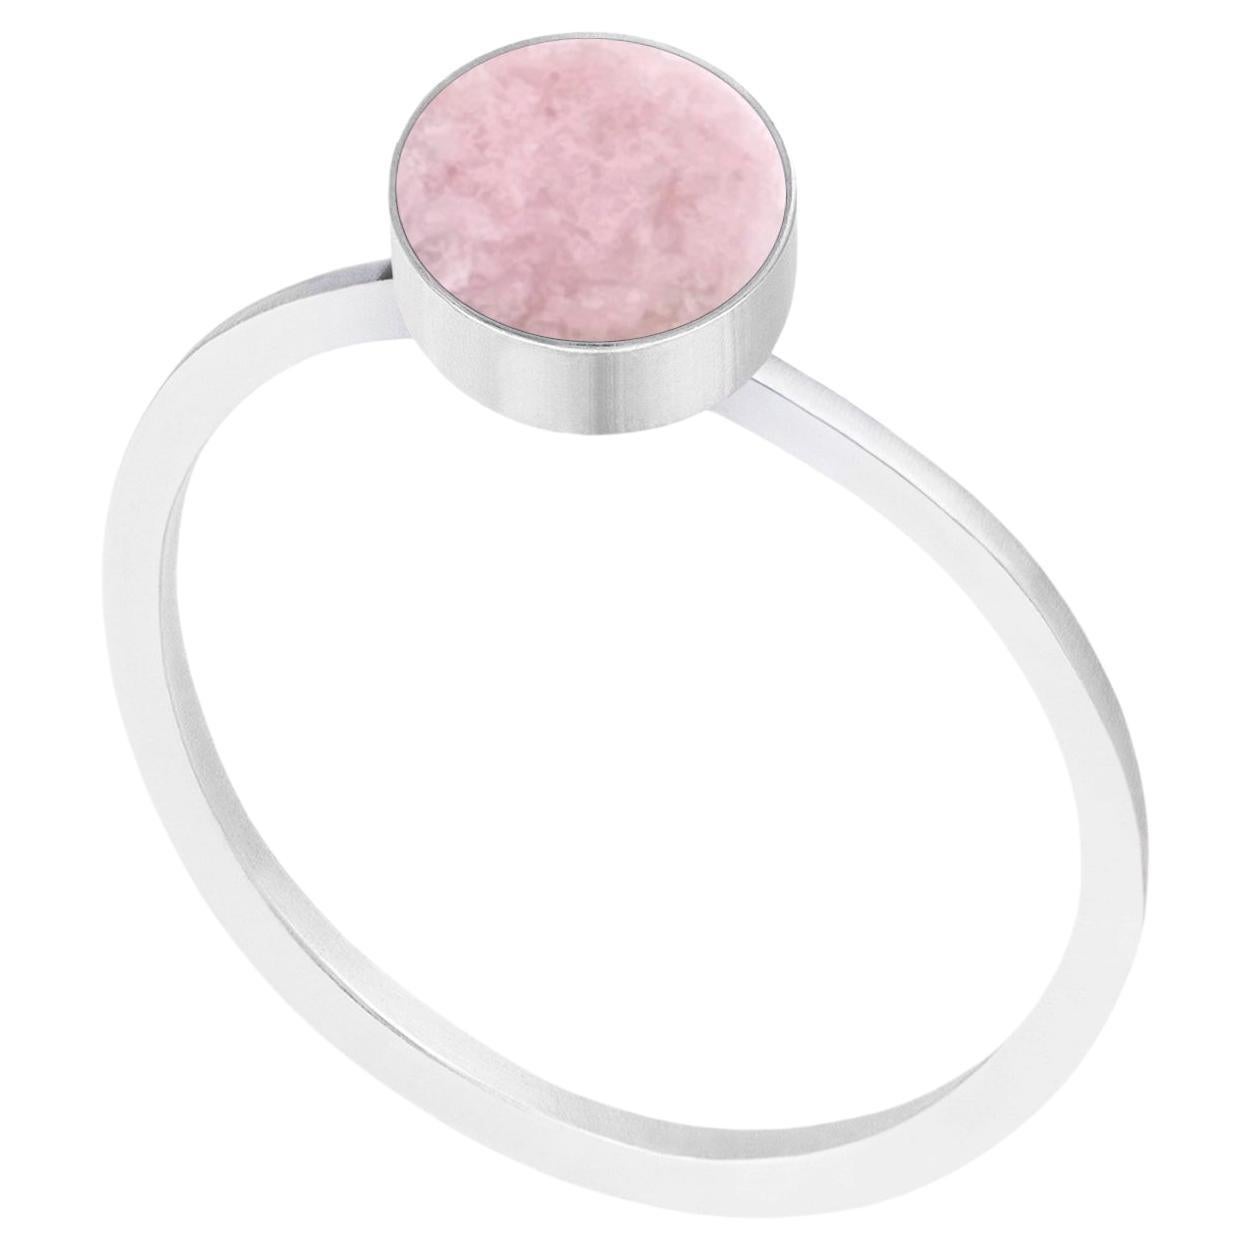 Discover the elegance of our minimal silver ring with a stunning pastel pink natural stone. Elevate your style with this delicate piece that combines simplicity and beauty.

The stone that adorns the ring is rodingite, rare metamorphic rock sourced